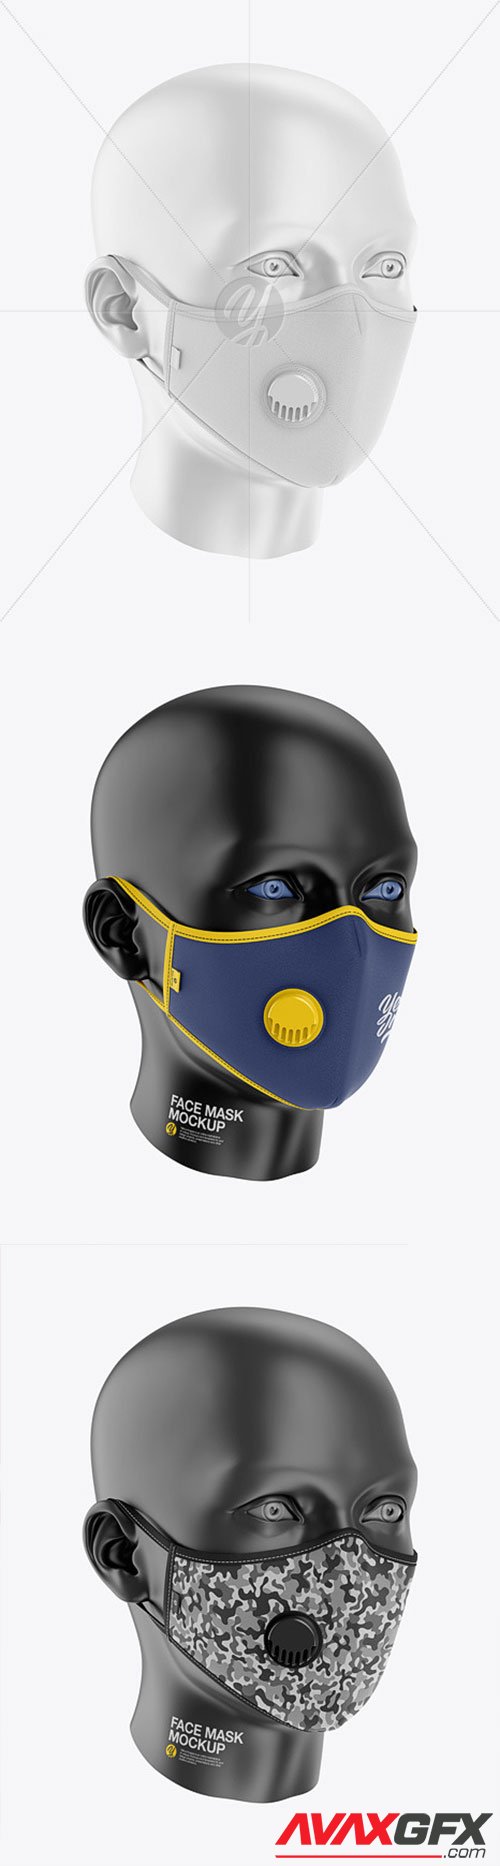 Anti-Pollution Face Mask with Exhalation Valve 62390